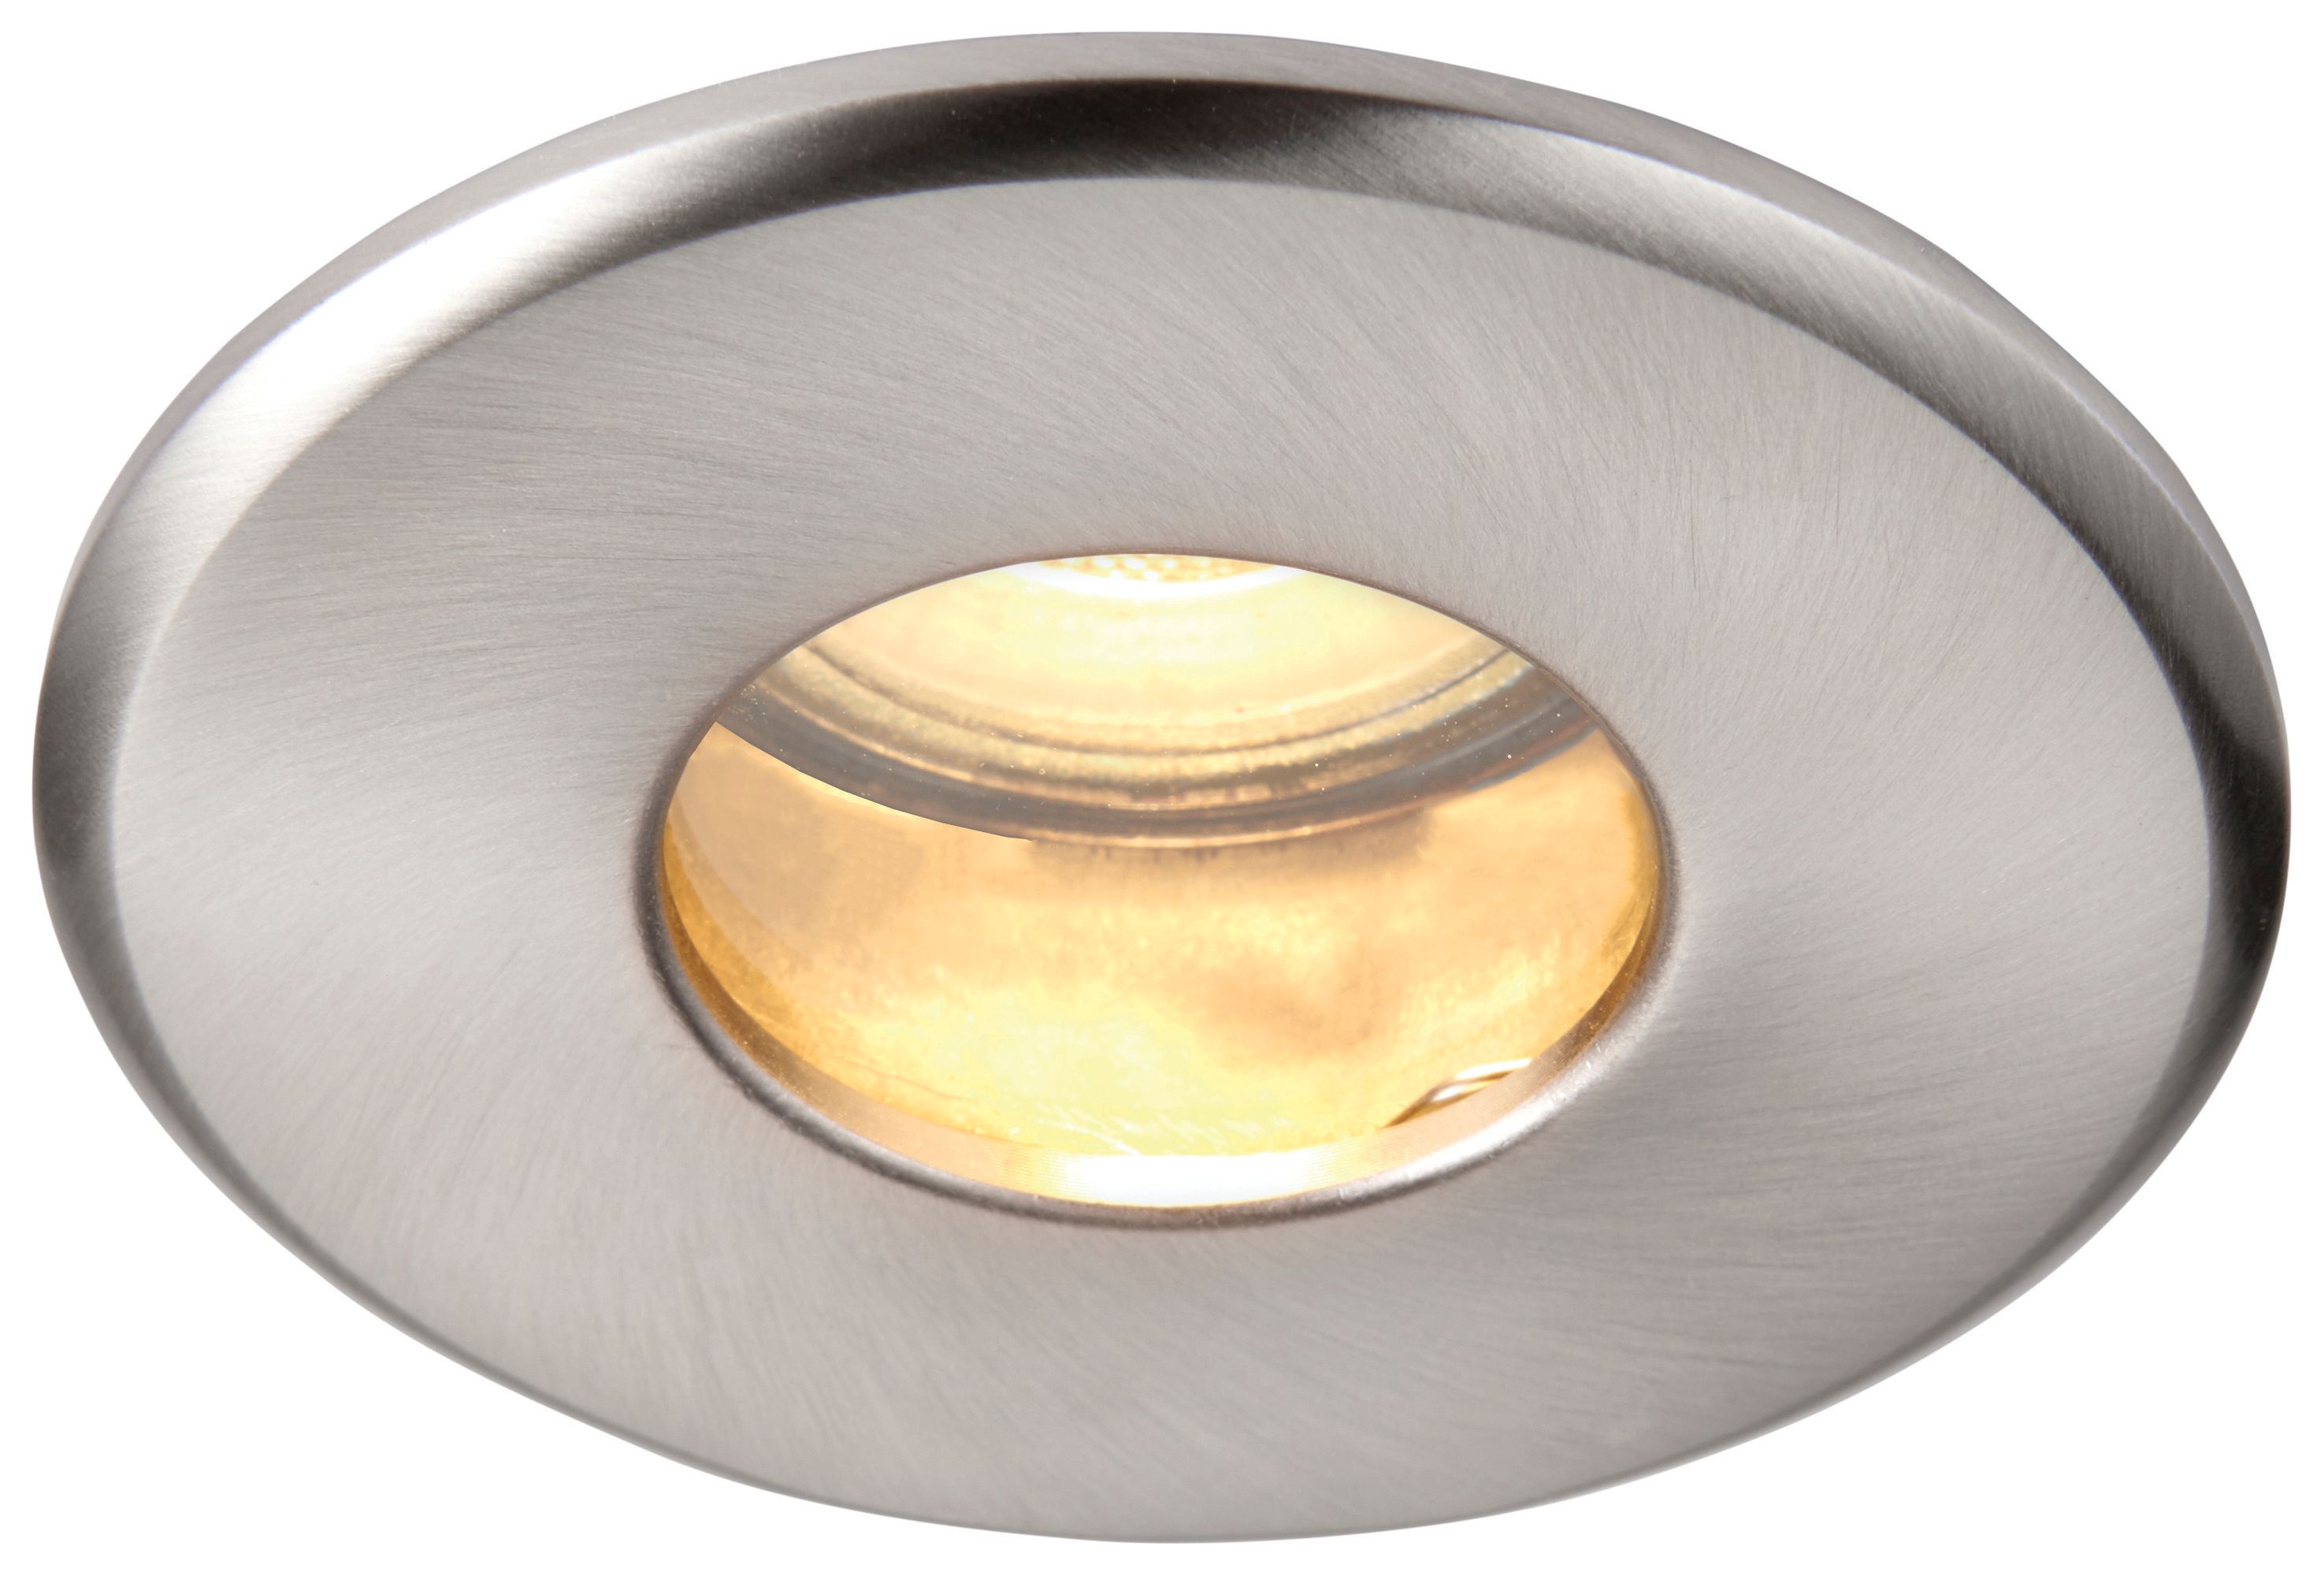 Saxby GU10 Fire Rated IP65 Cast Fixed Downlight - Brushed Nickel